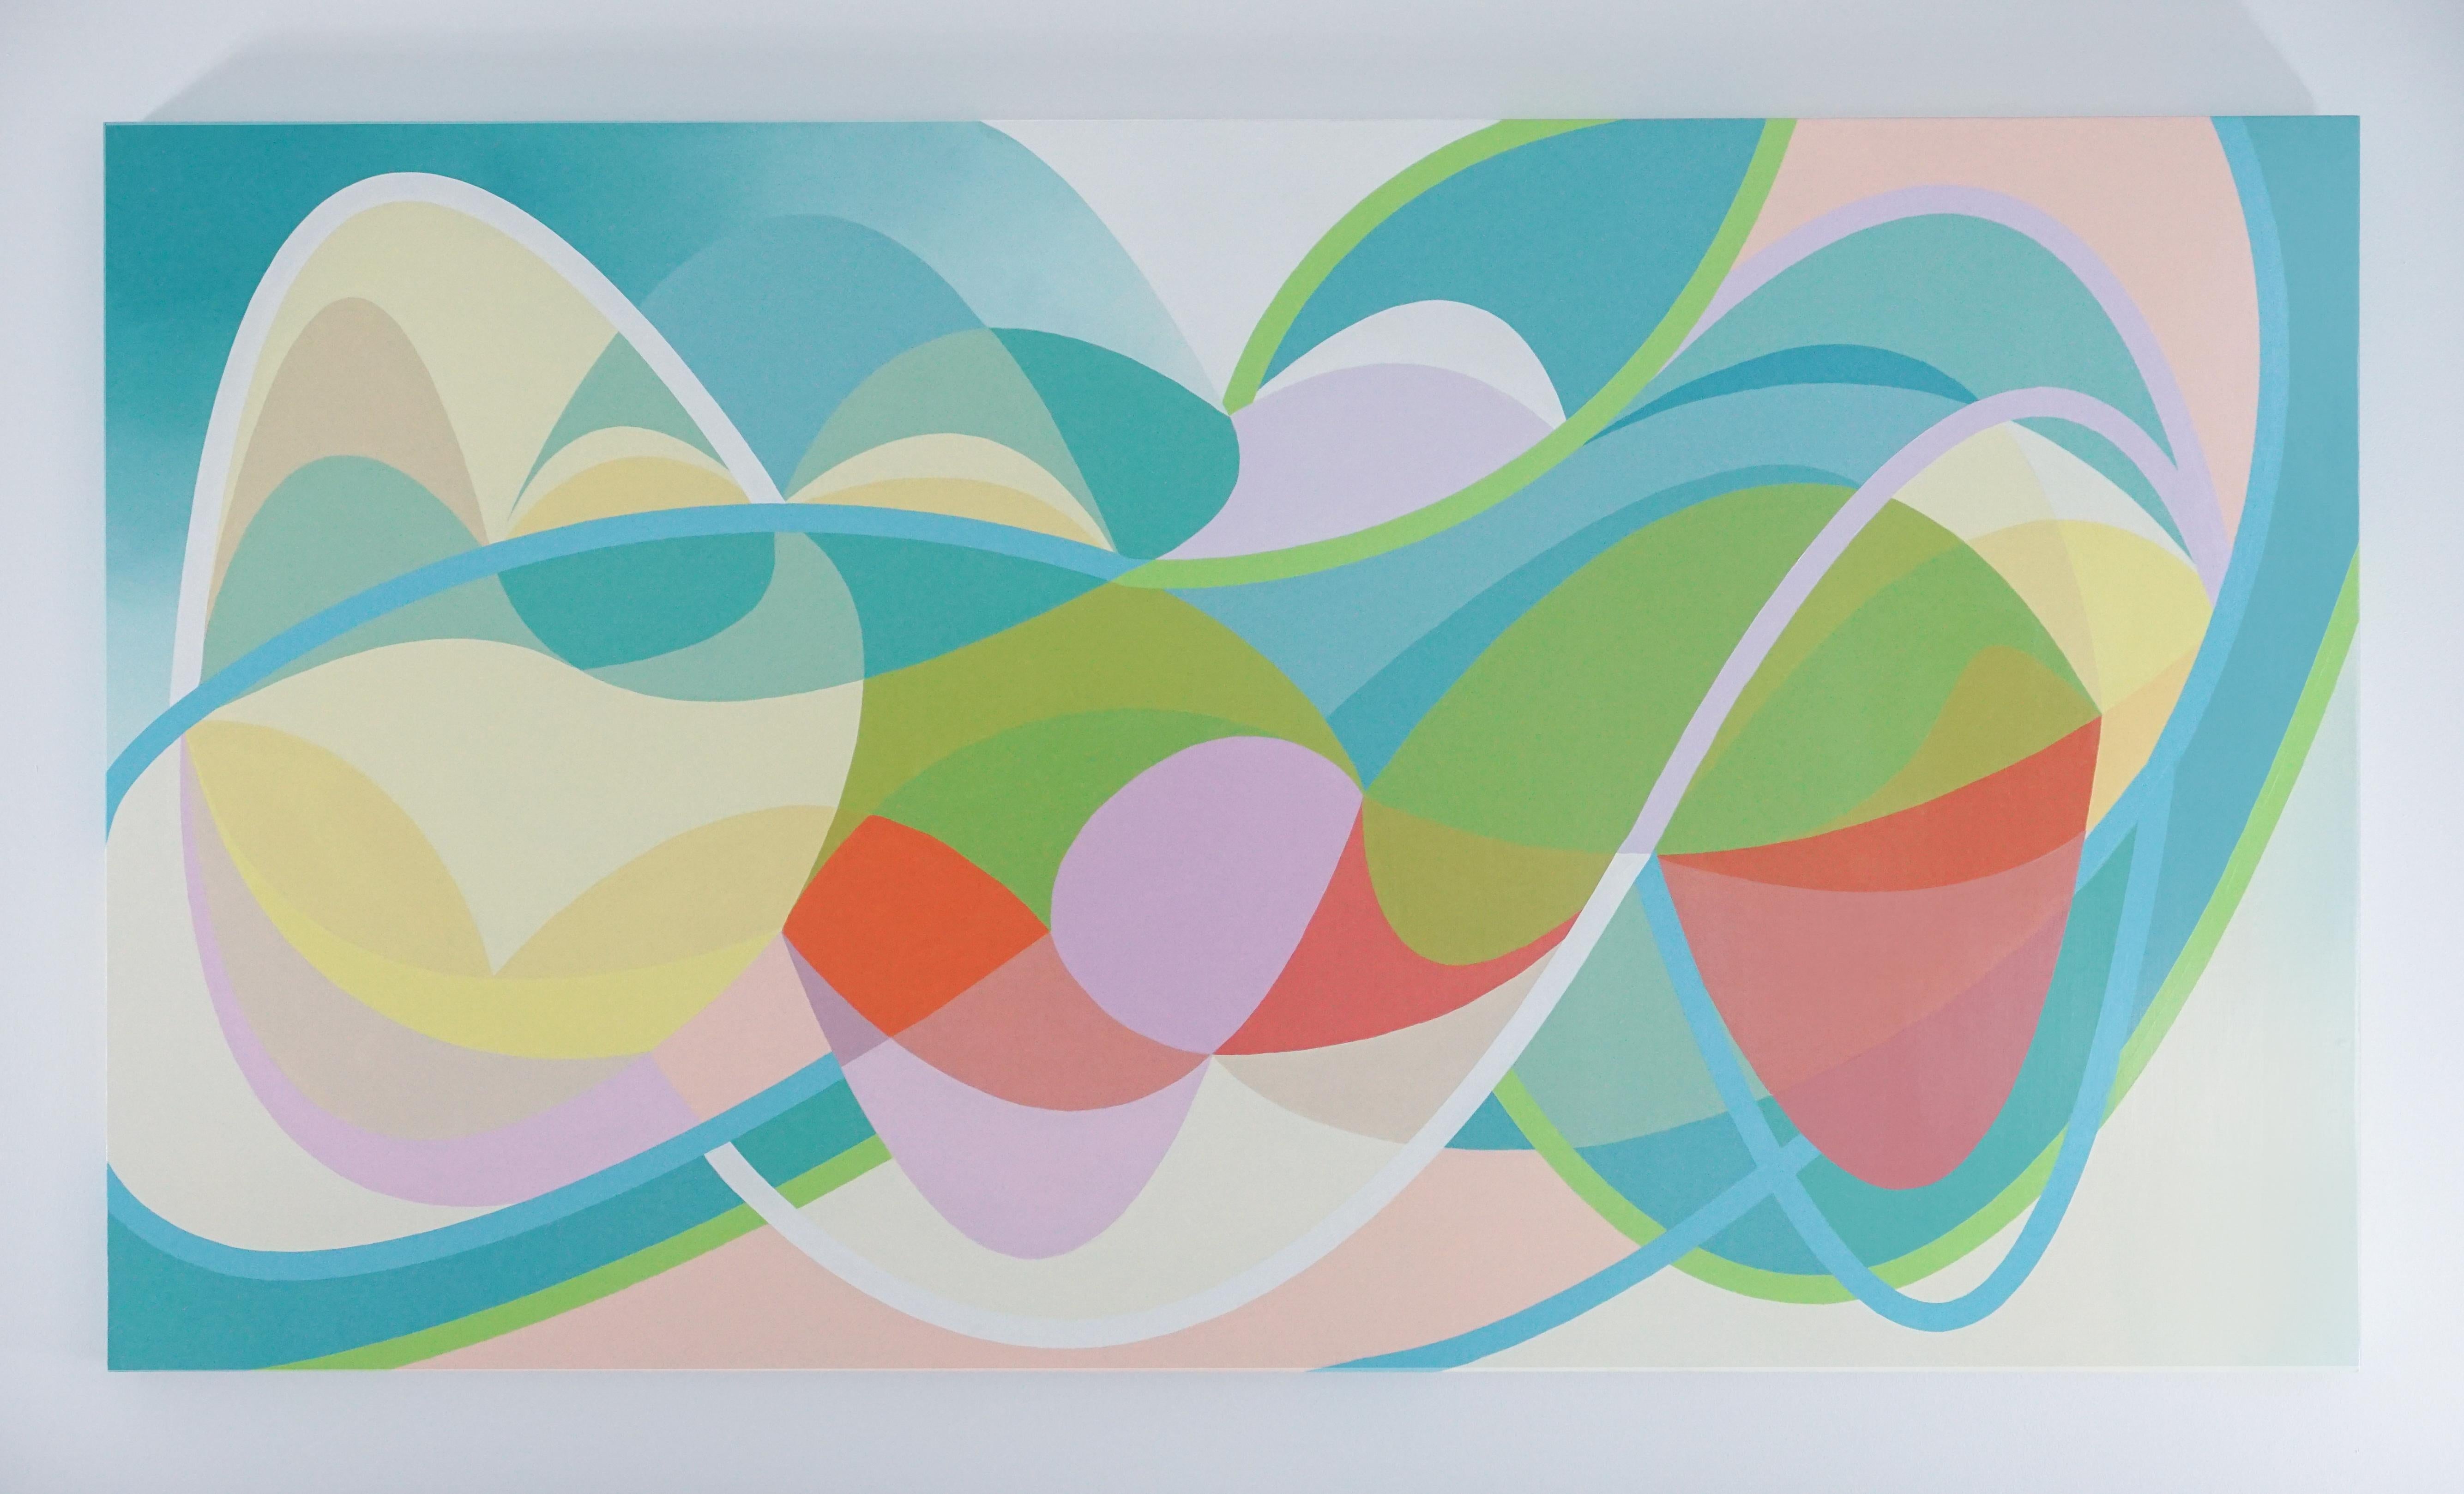 In this painting, Michelle Weddle utilizes line, color, and form to create a work which acts at the balance between the nonobjective and representational. Primarily using earth shades of pastel greens and blues, which loop elliptically around a